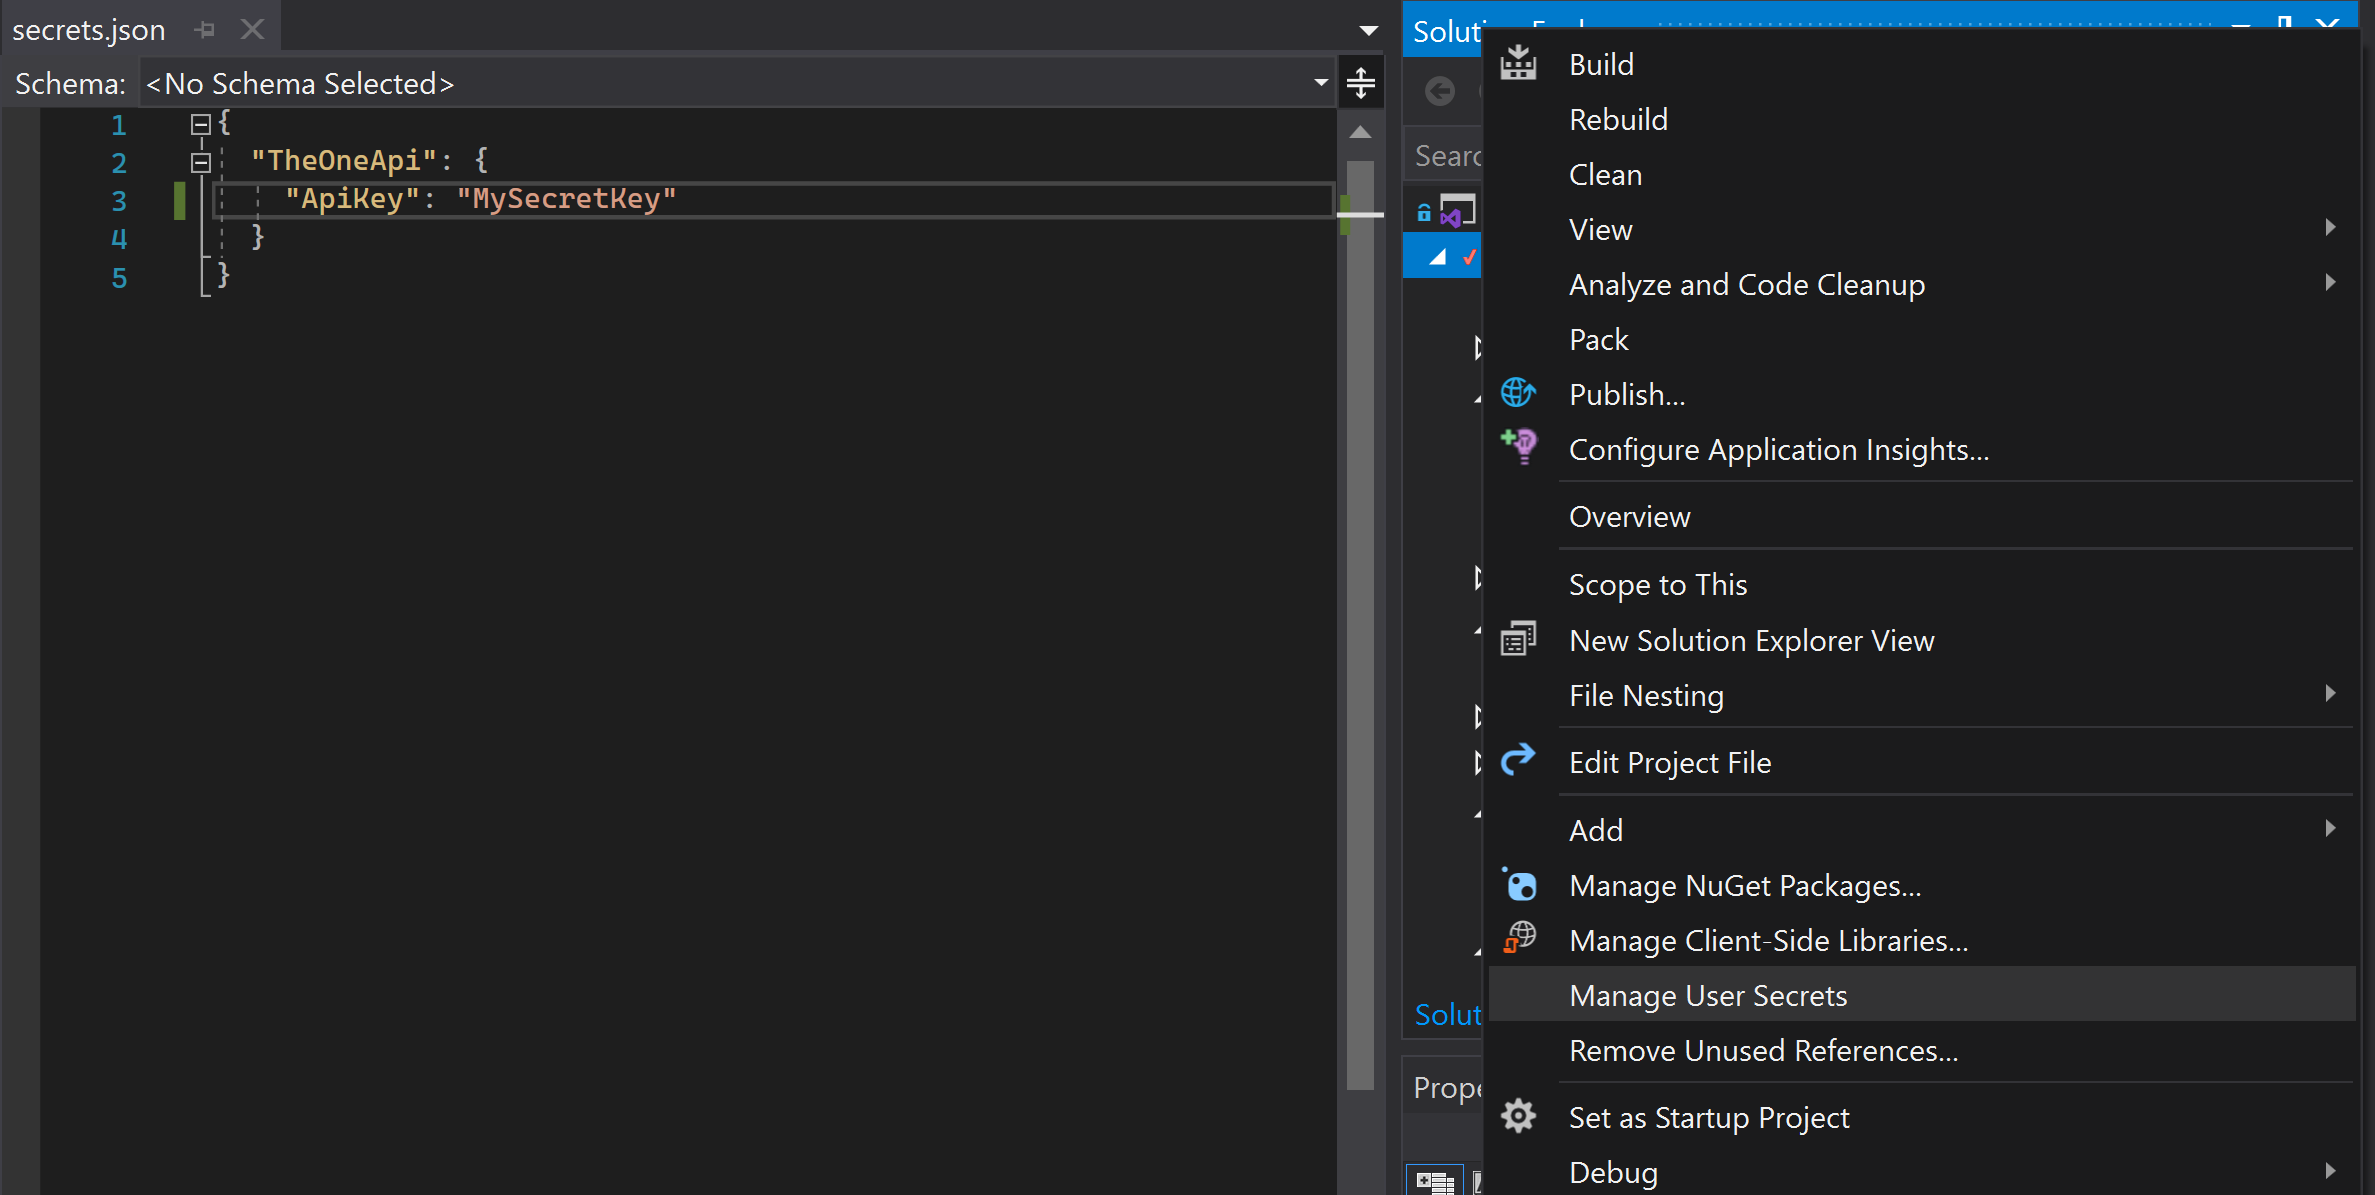 Secrets.json file and option to generate it in Visual Studio.